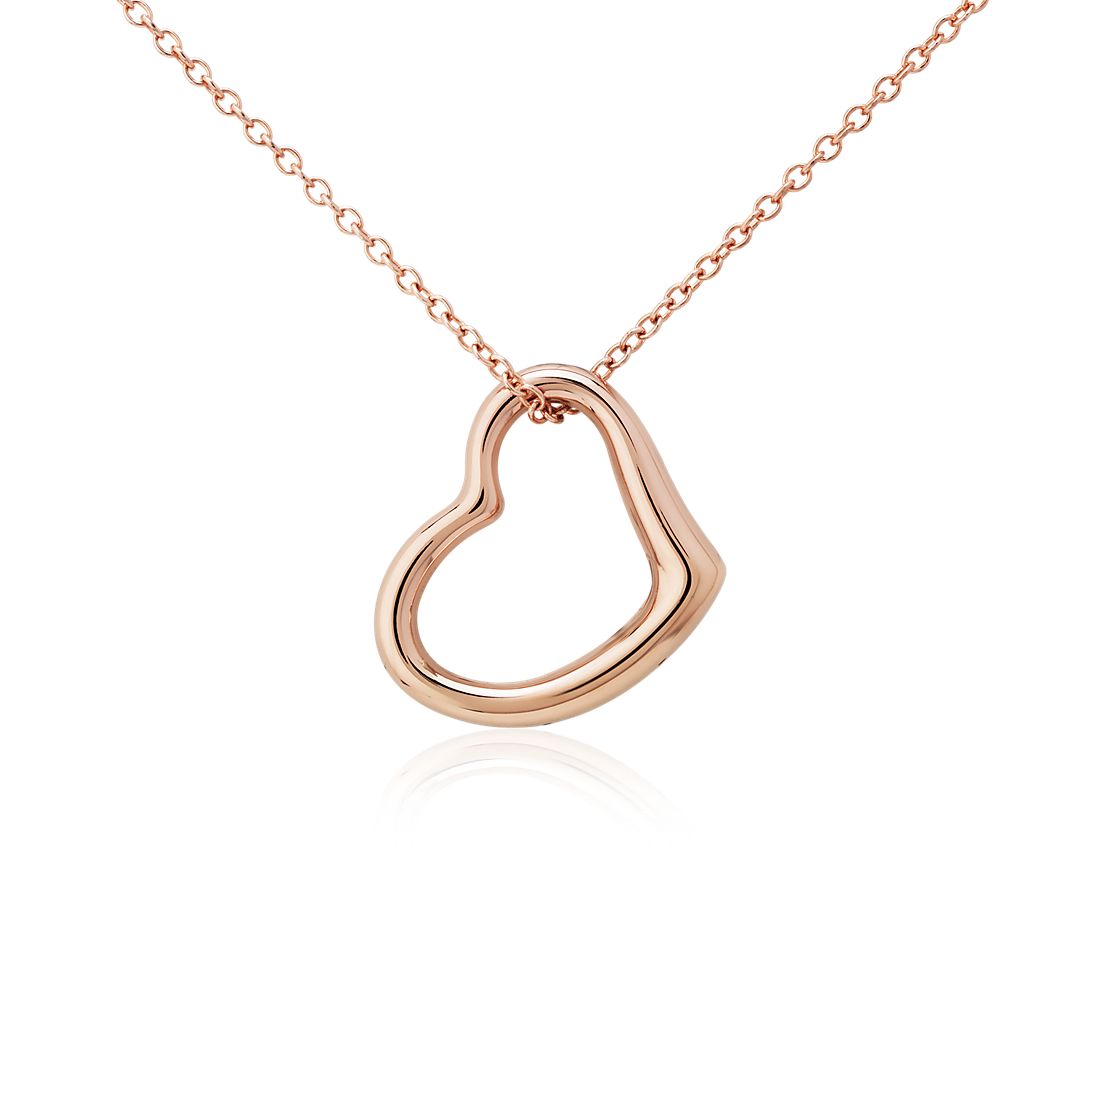 Yellow Gold Rose Gold Choose Your Heart Sterling Silver Heart Charm Necklace on 18 chain